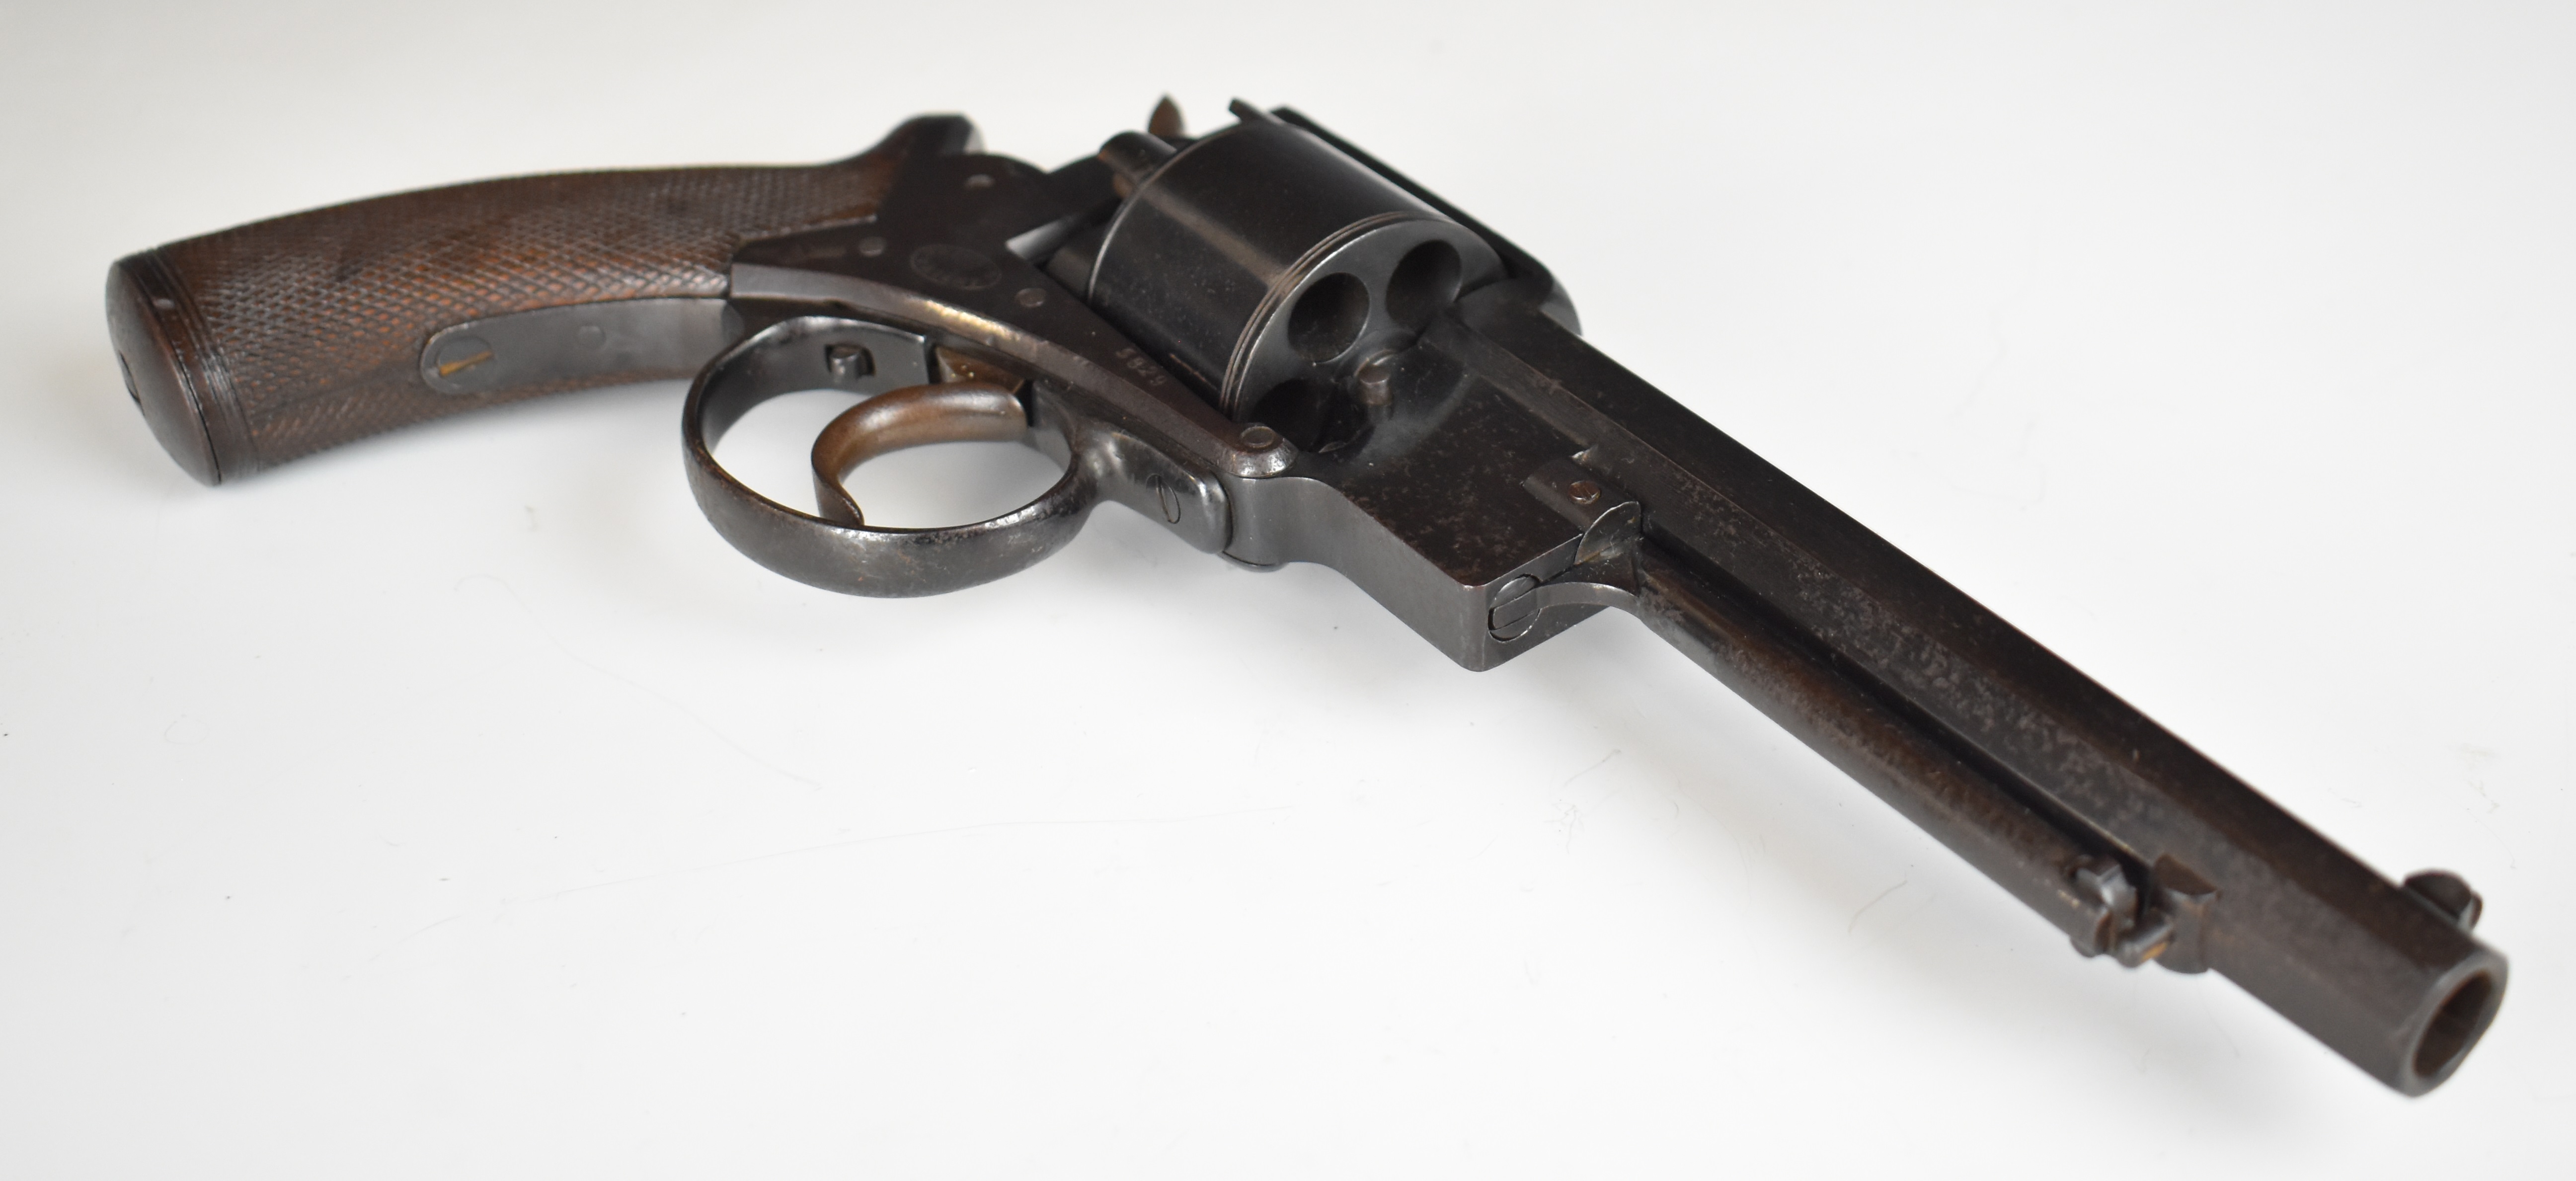 Adam's Patent 50 bore six-shot double-action revolver with chequered grip, line engraved cylinder, - Image 4 of 30